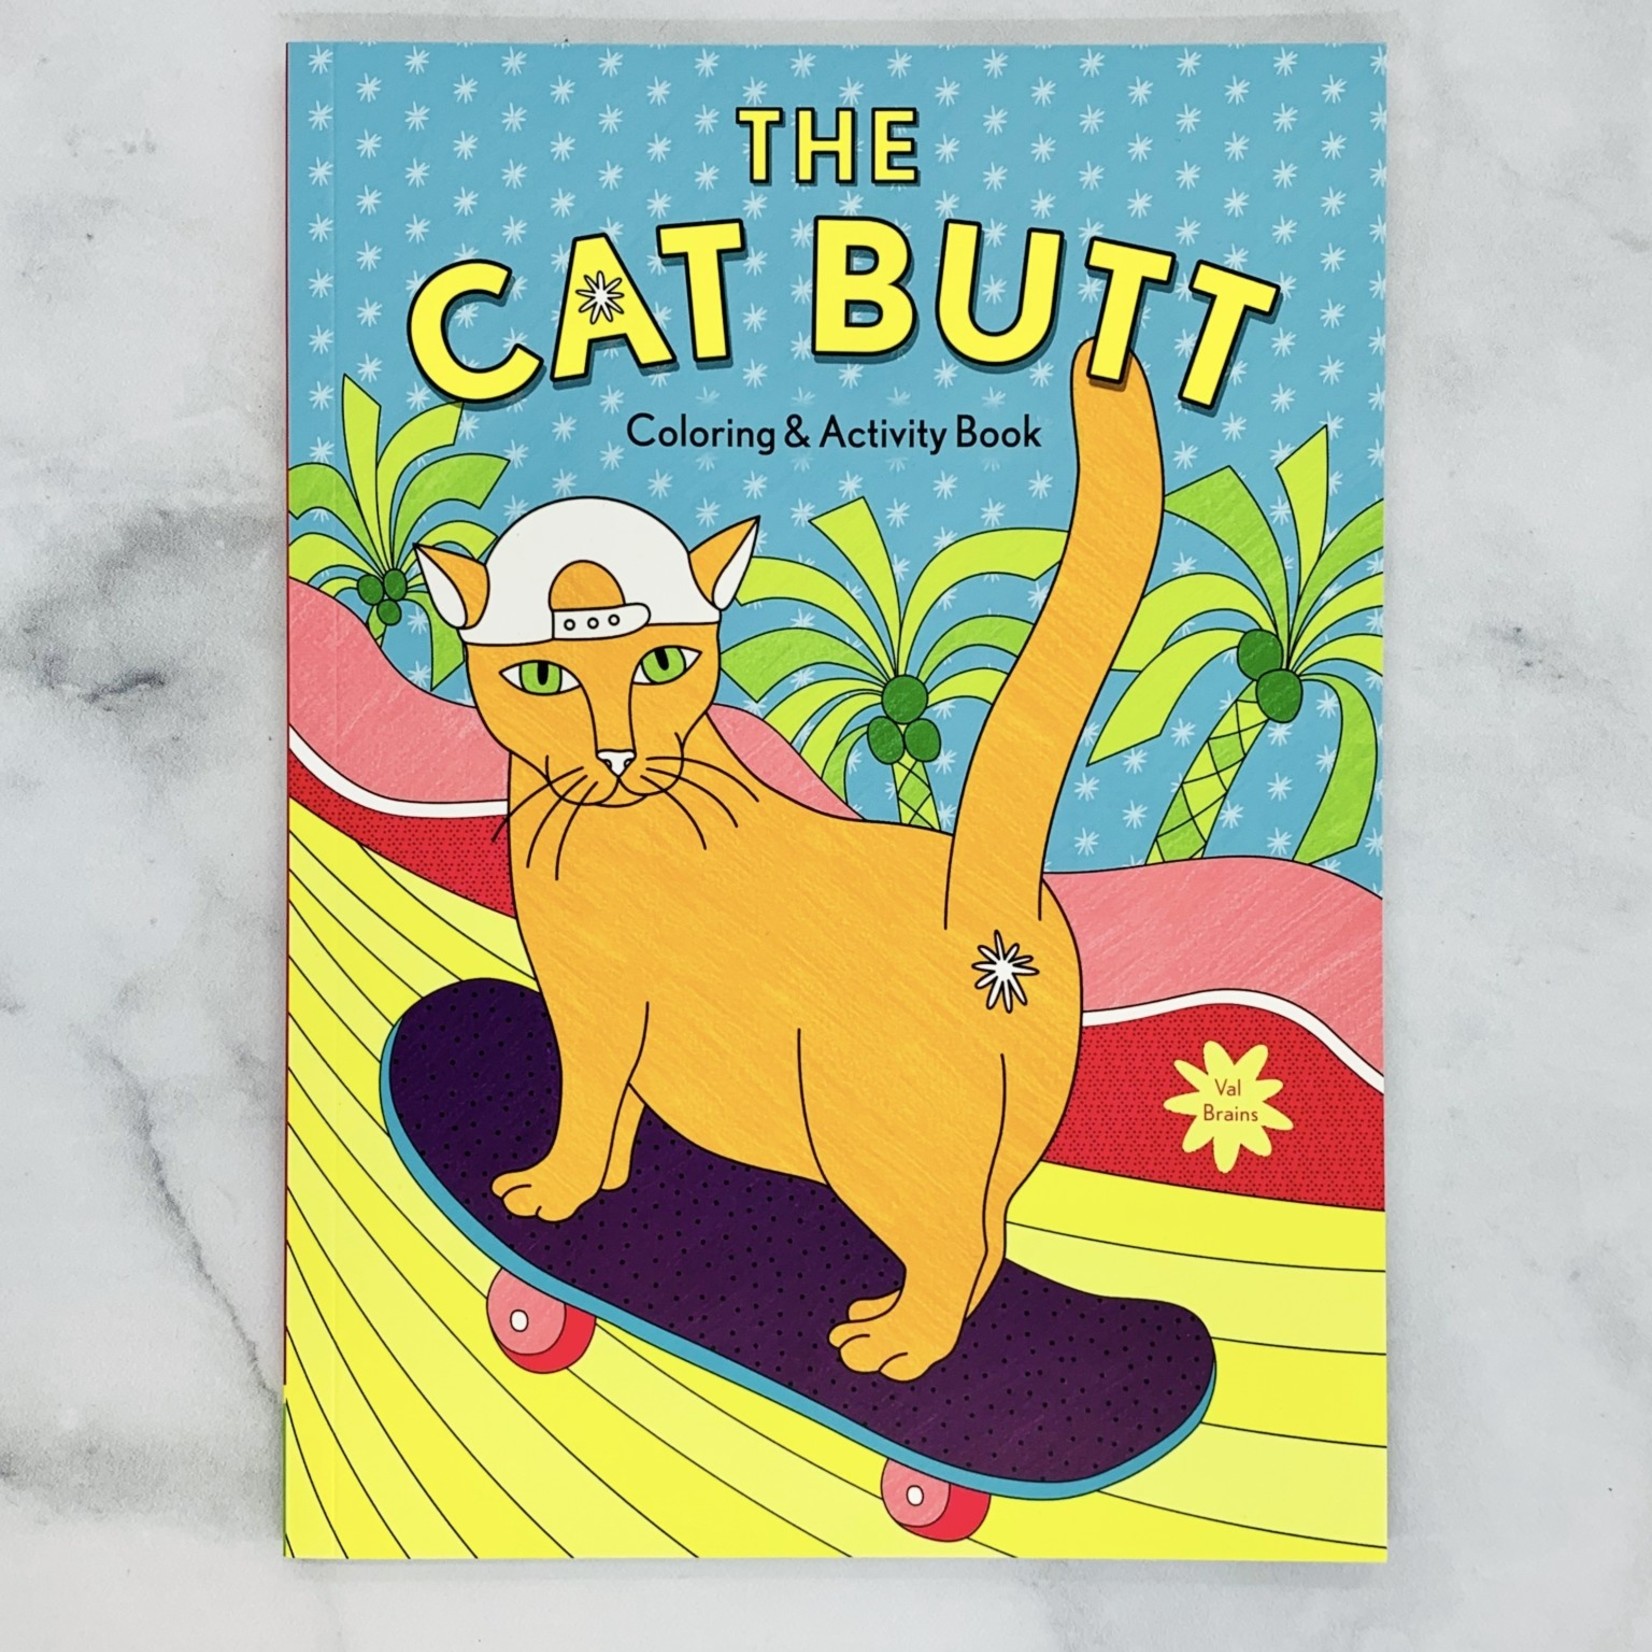 Cat Butt Coloring and Activity Book